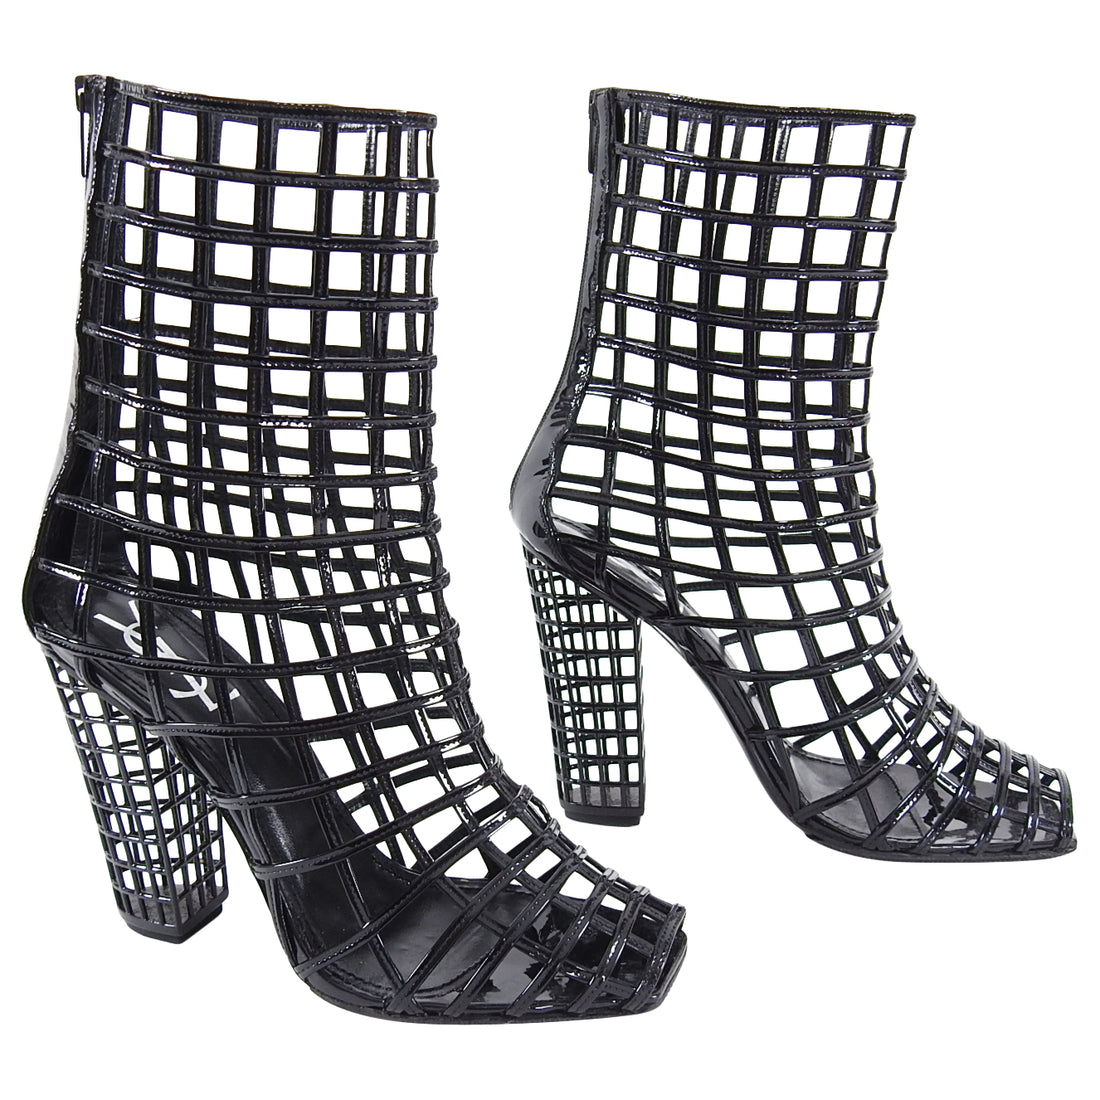 YSL Yves Saint Laurent Iconic 2009 Runway Black Cage Ankle Boots - 40